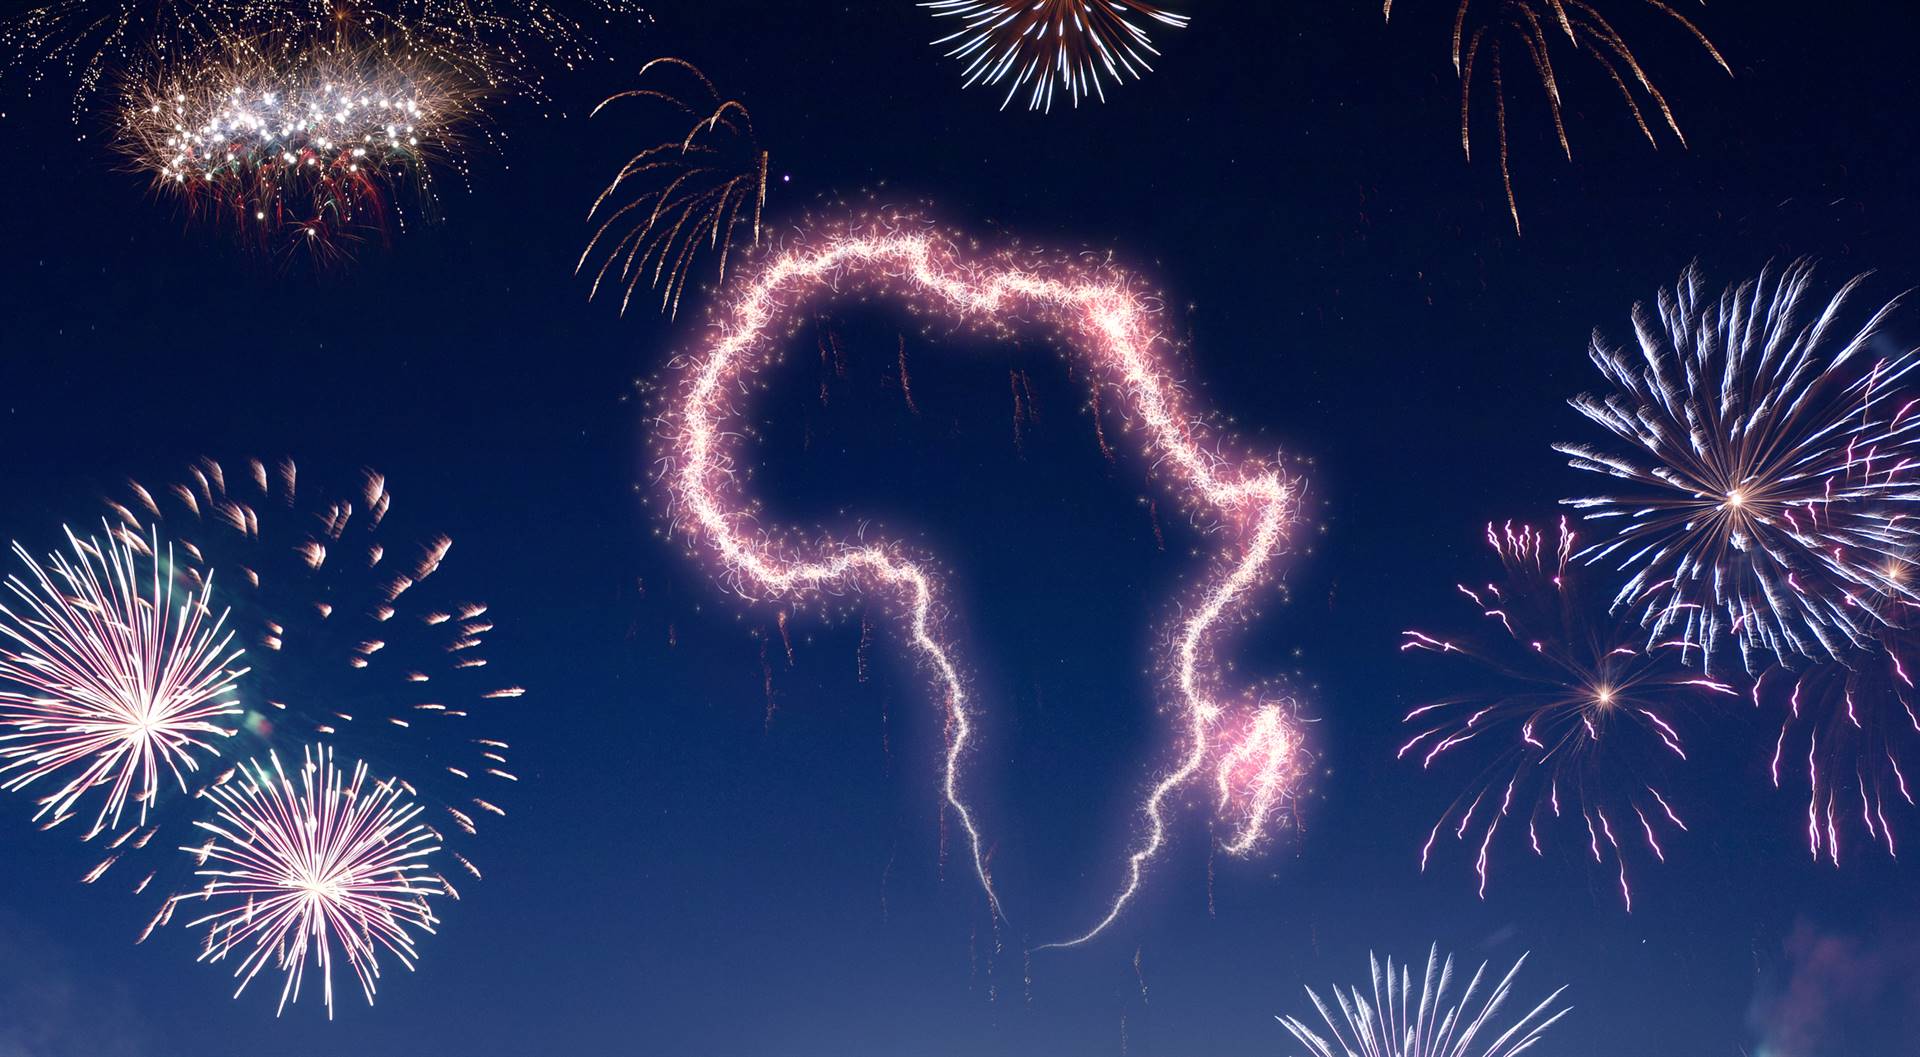 Africa Day is celebrated on May 25. Picture: iStock/Gallo Images